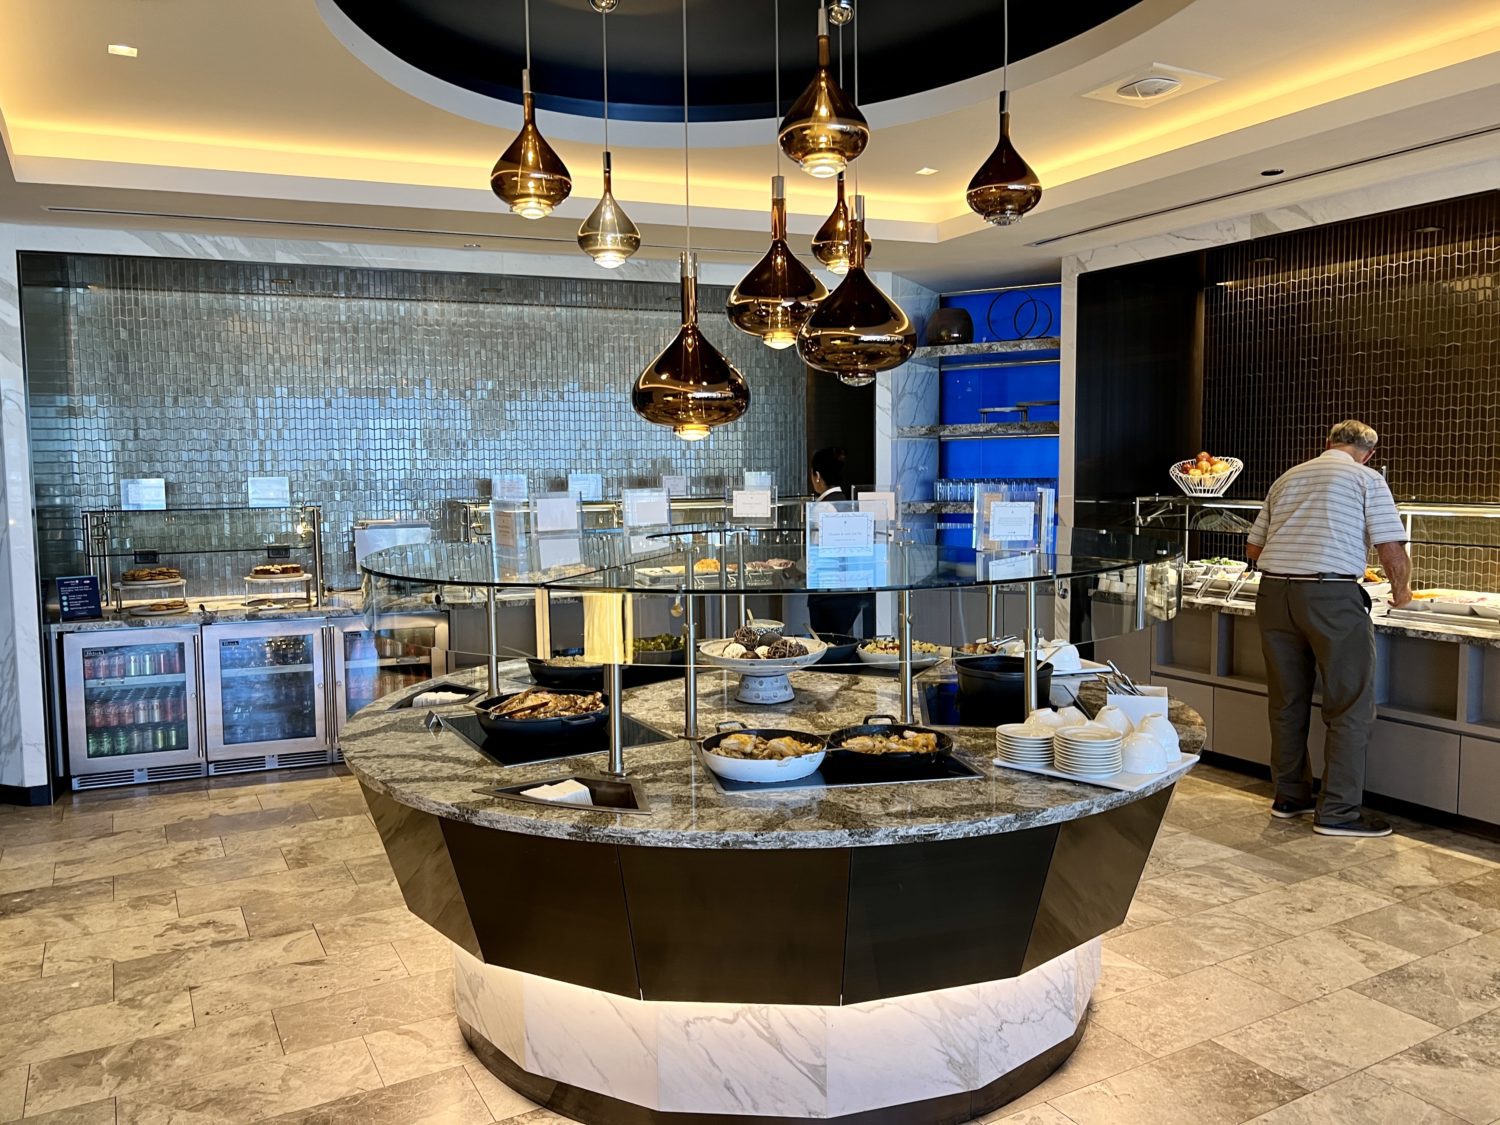 united polaris lounge chicago food  Review: United Polaris Lounge Chicago (ORD) &#8211; Thrifty Traveler united polaris lounge chicago buffet scaled